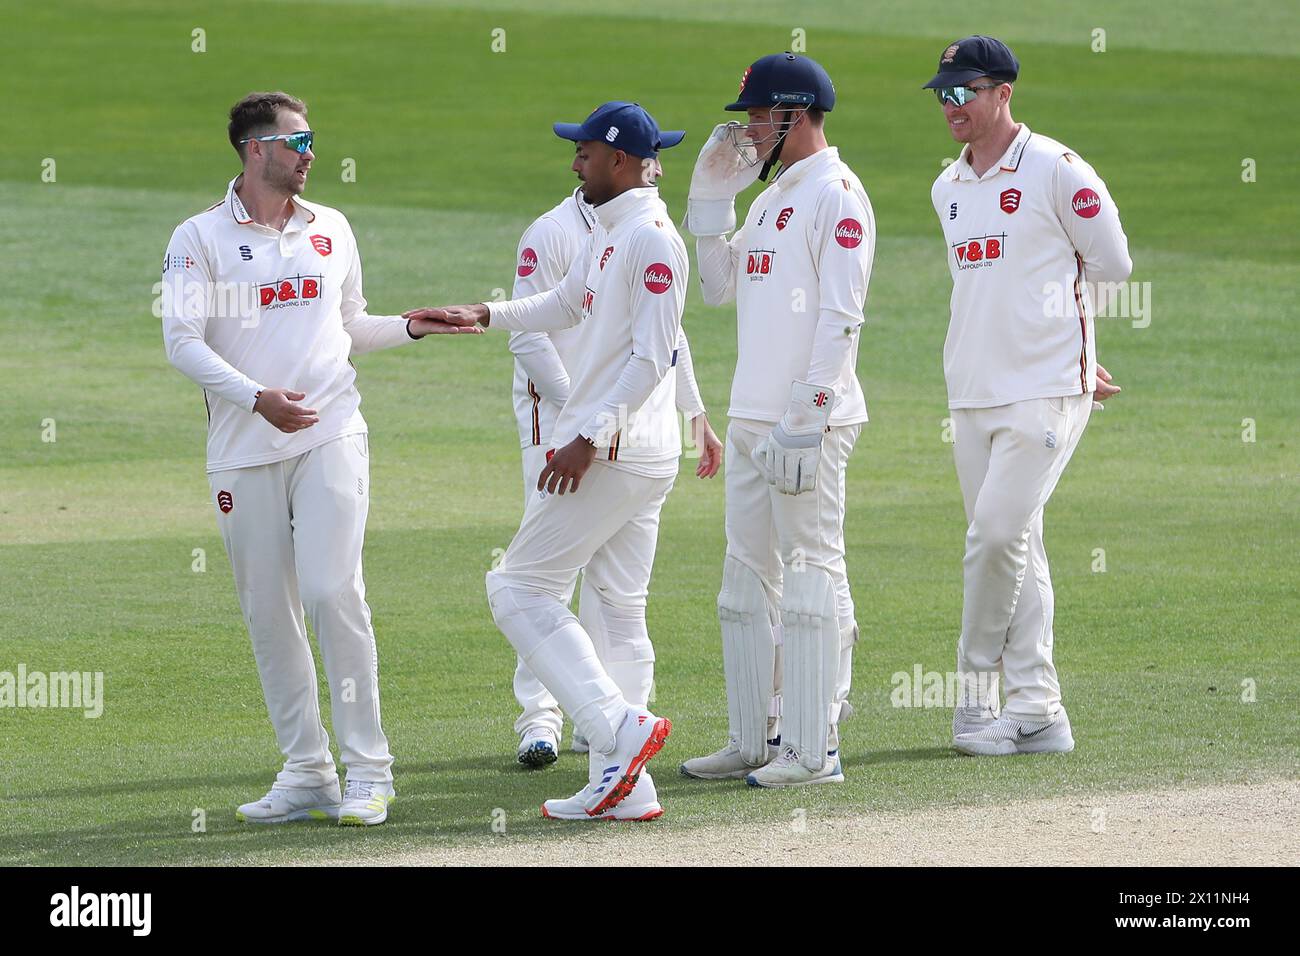 Matt Critchley celebrates with his team mates after taking the wicket of Matt Parkinson during Essex CCC vs Kent CCC, Vitality County Championship Div Stock Photo